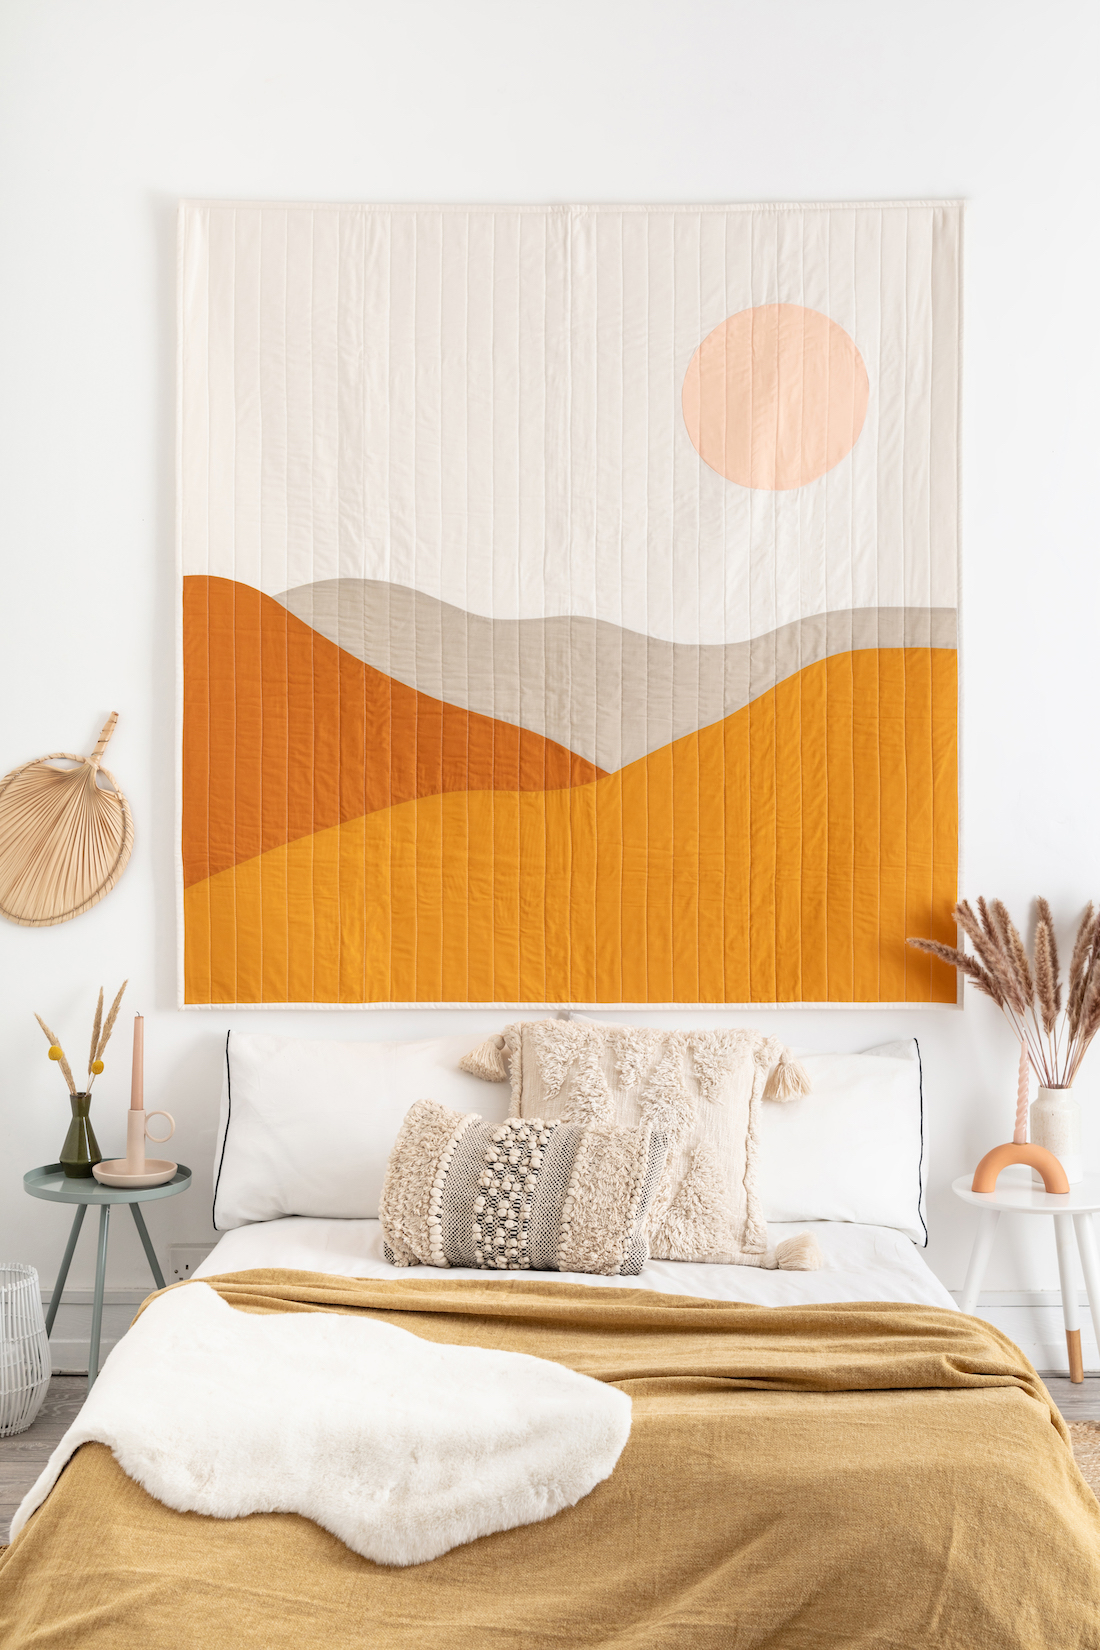 Desert Quilt by Excell Quilt Co